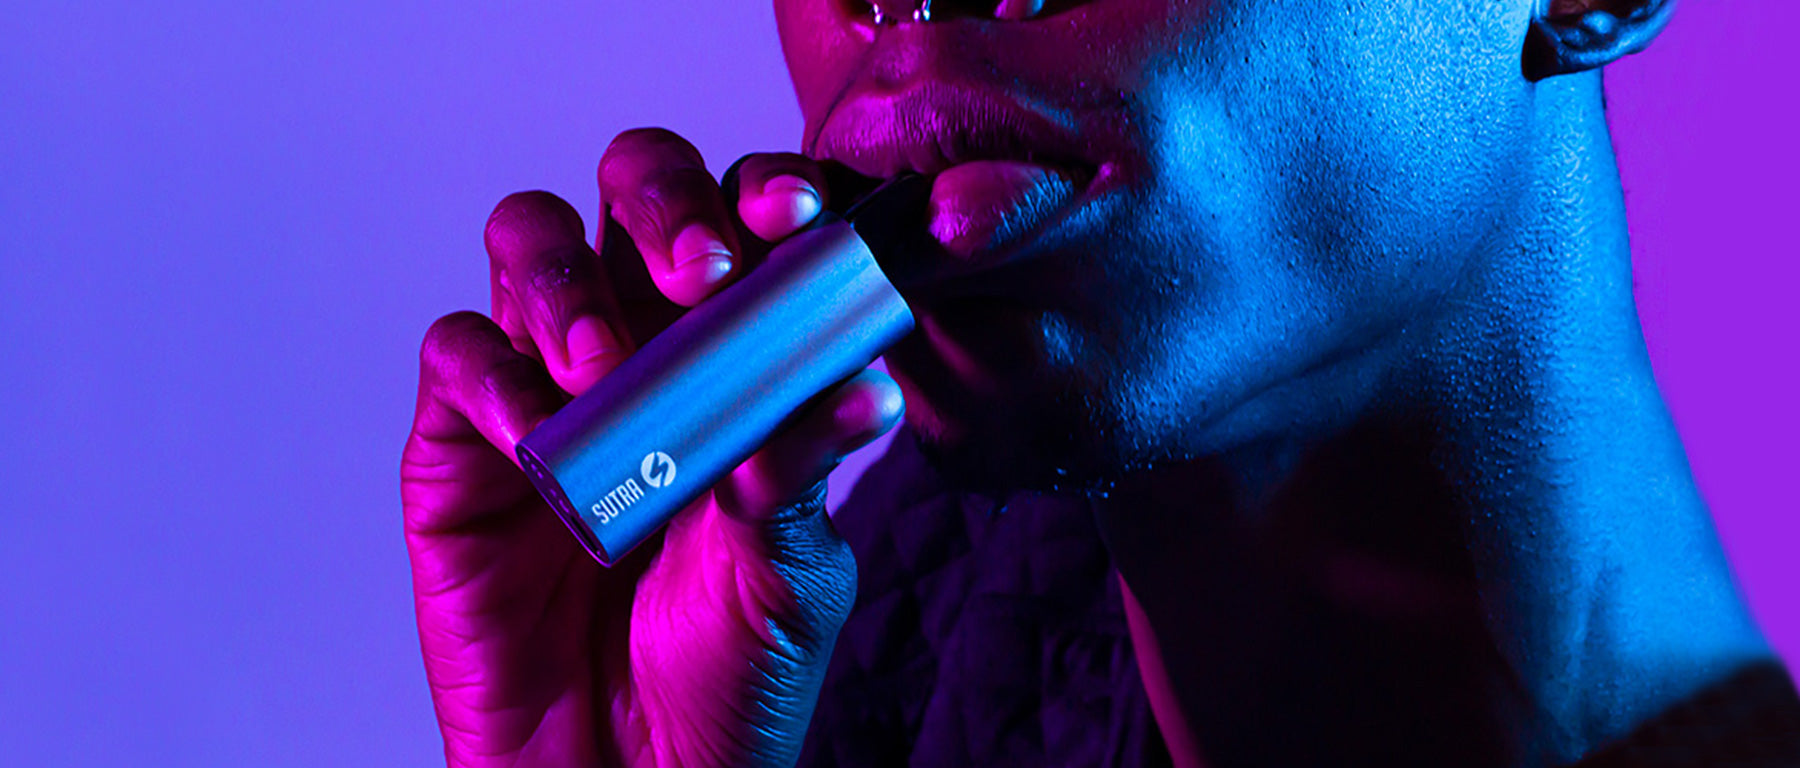 Man holding Sutra Auto Vaporizer in colorful studio background